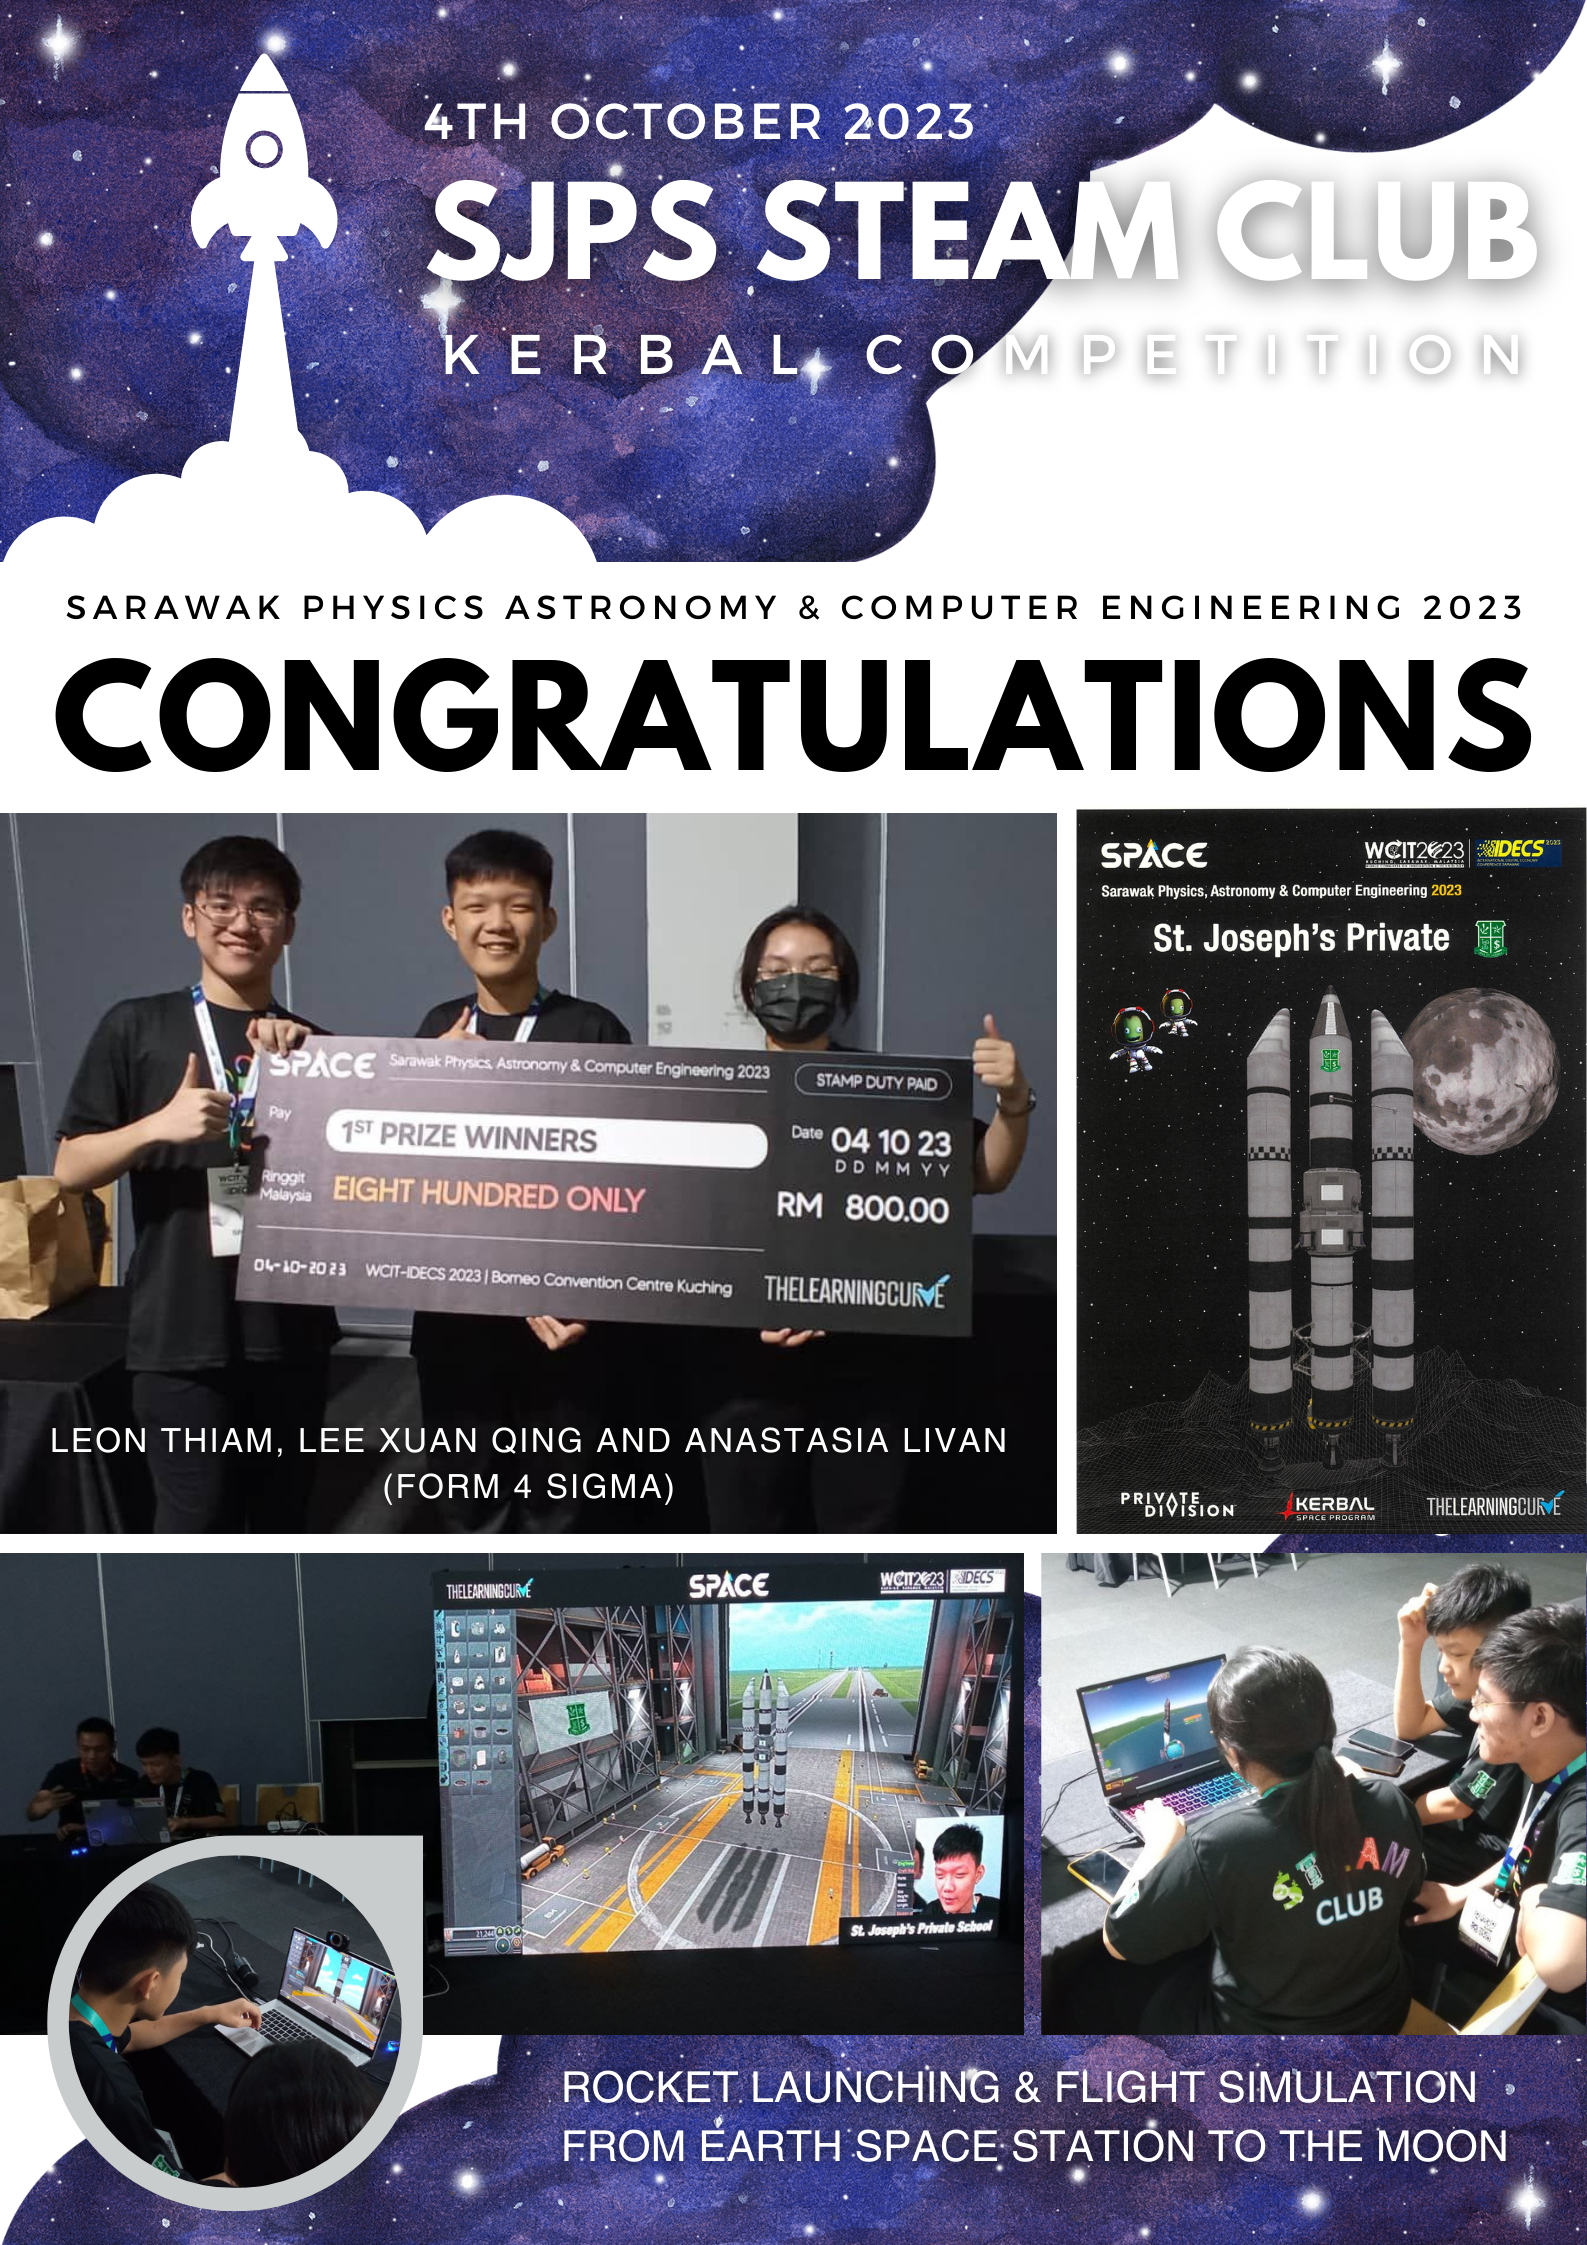 STEAM CLUB - KERBAL COMPETITION 2023